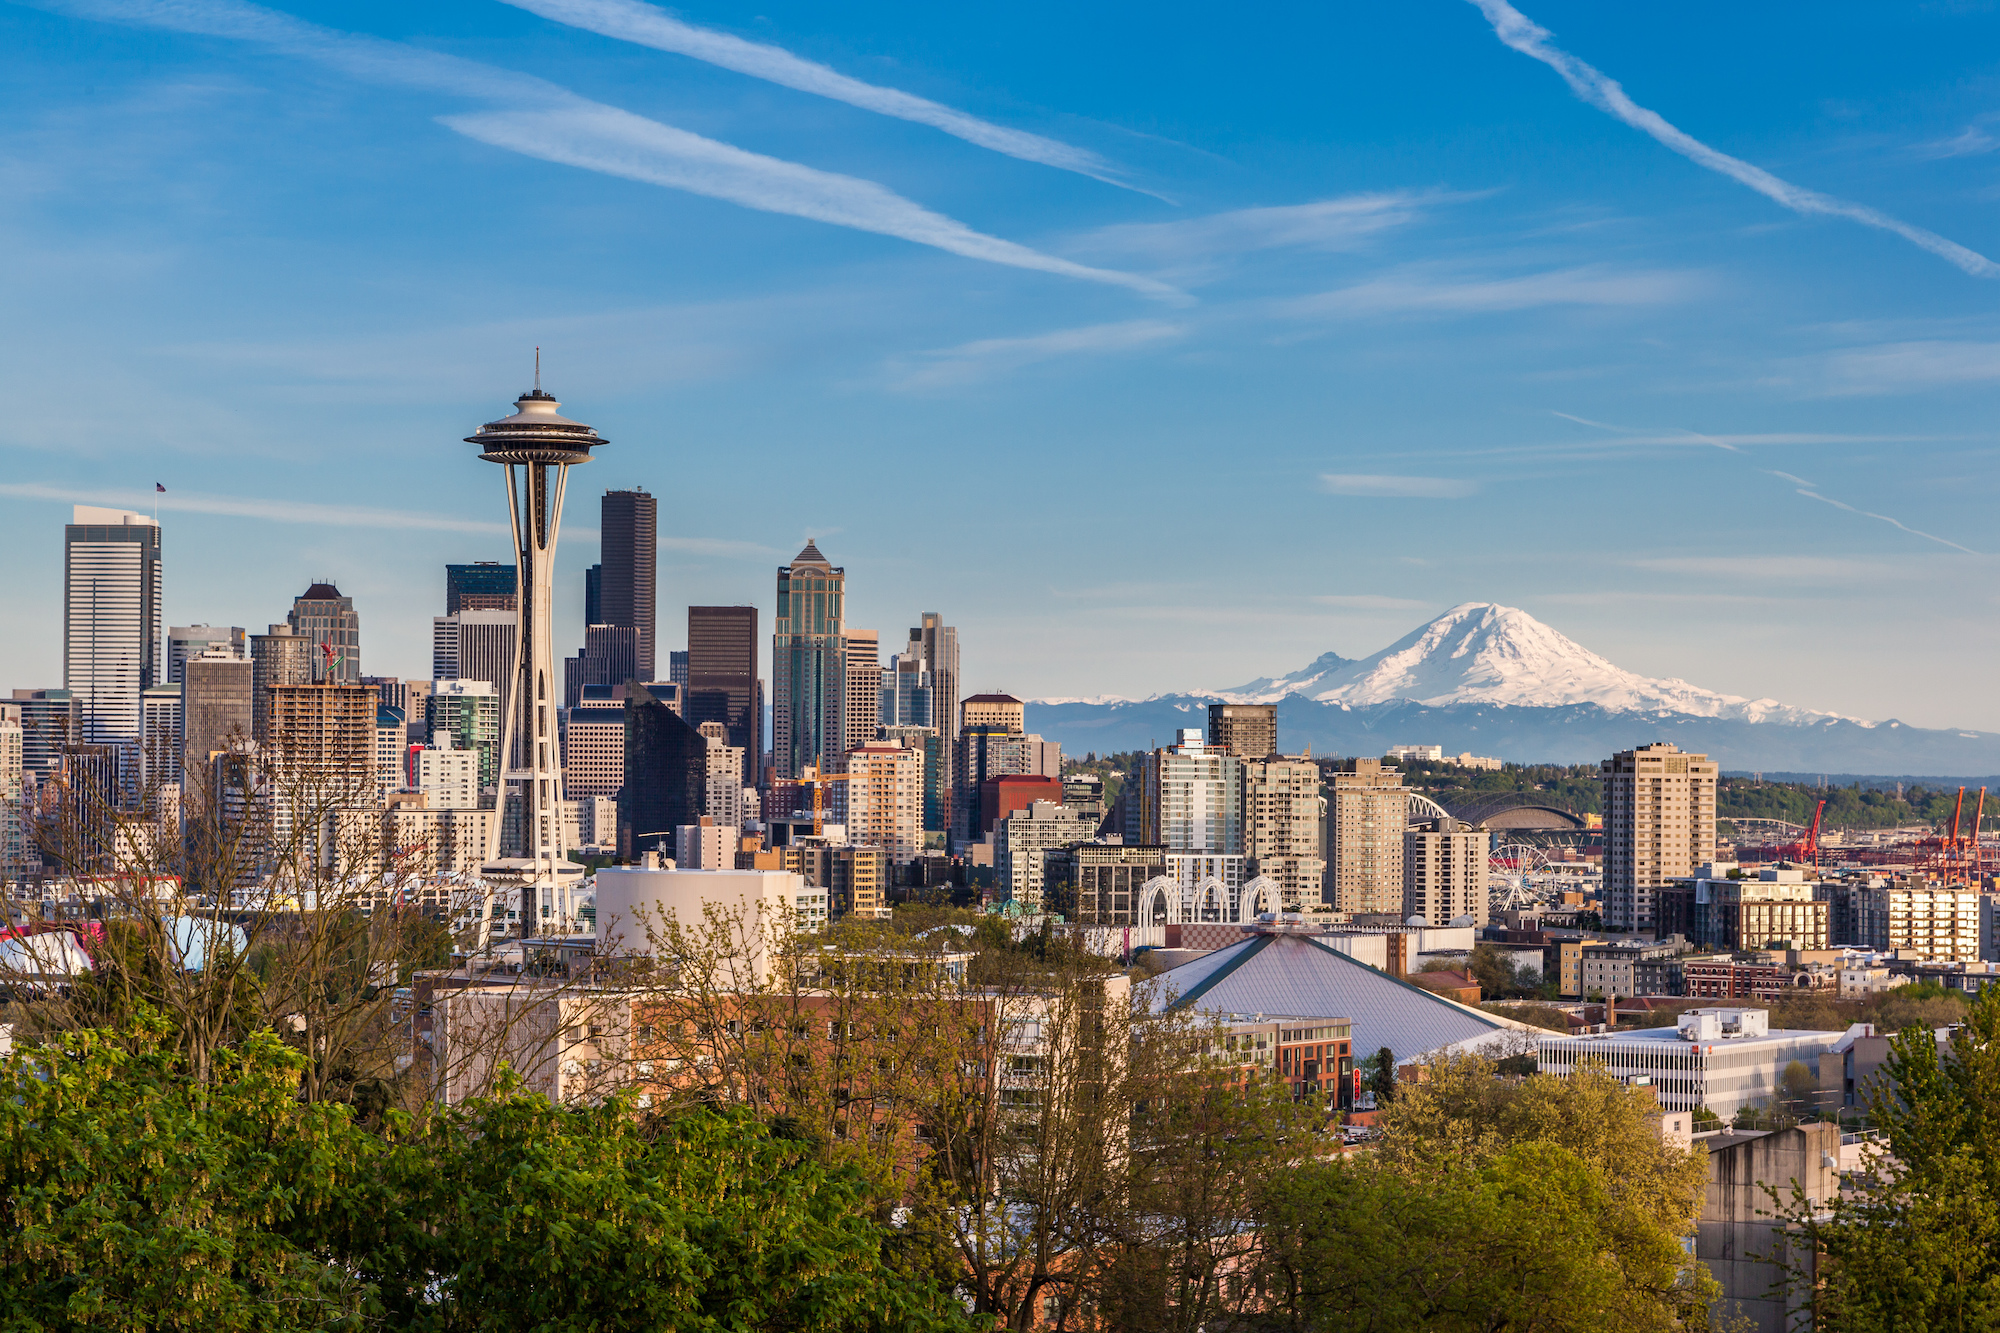 A daytime photo of the Seattle skyline.